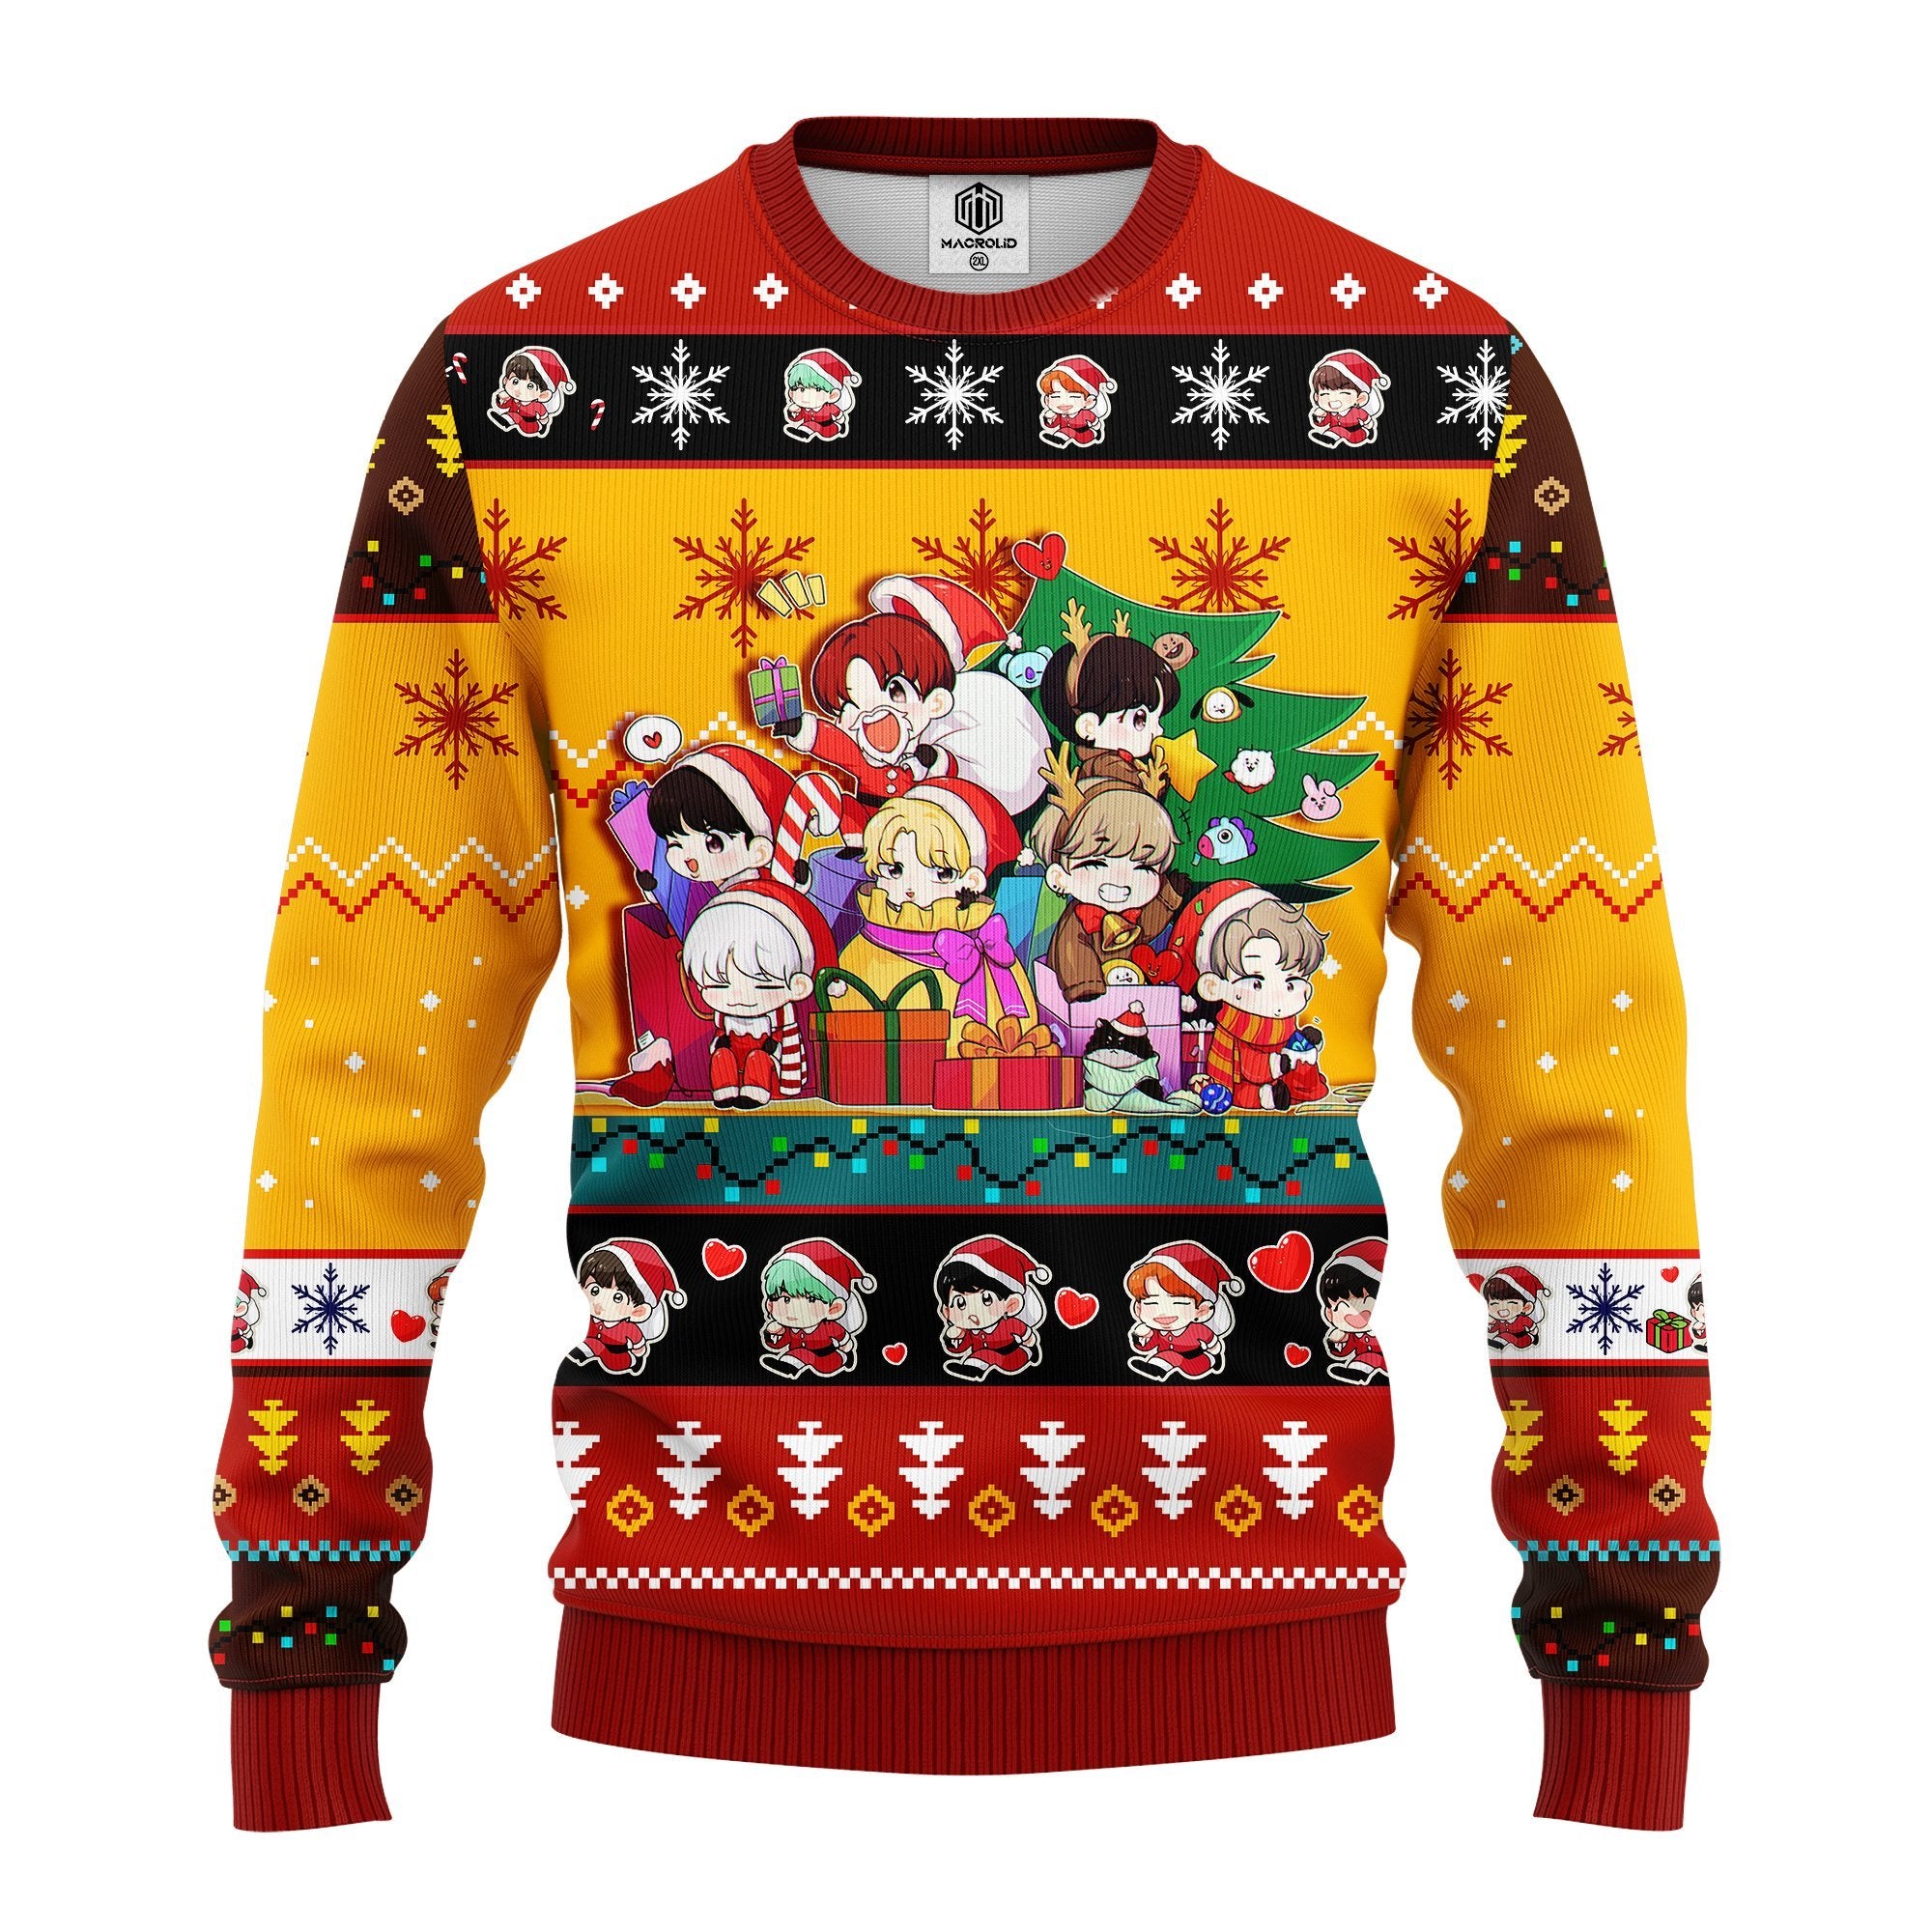 Bts Army Chibi Cute Ugly Christmas Sweater Red Yellow 1 Amazing Gift Idea Thanksgiving Gift